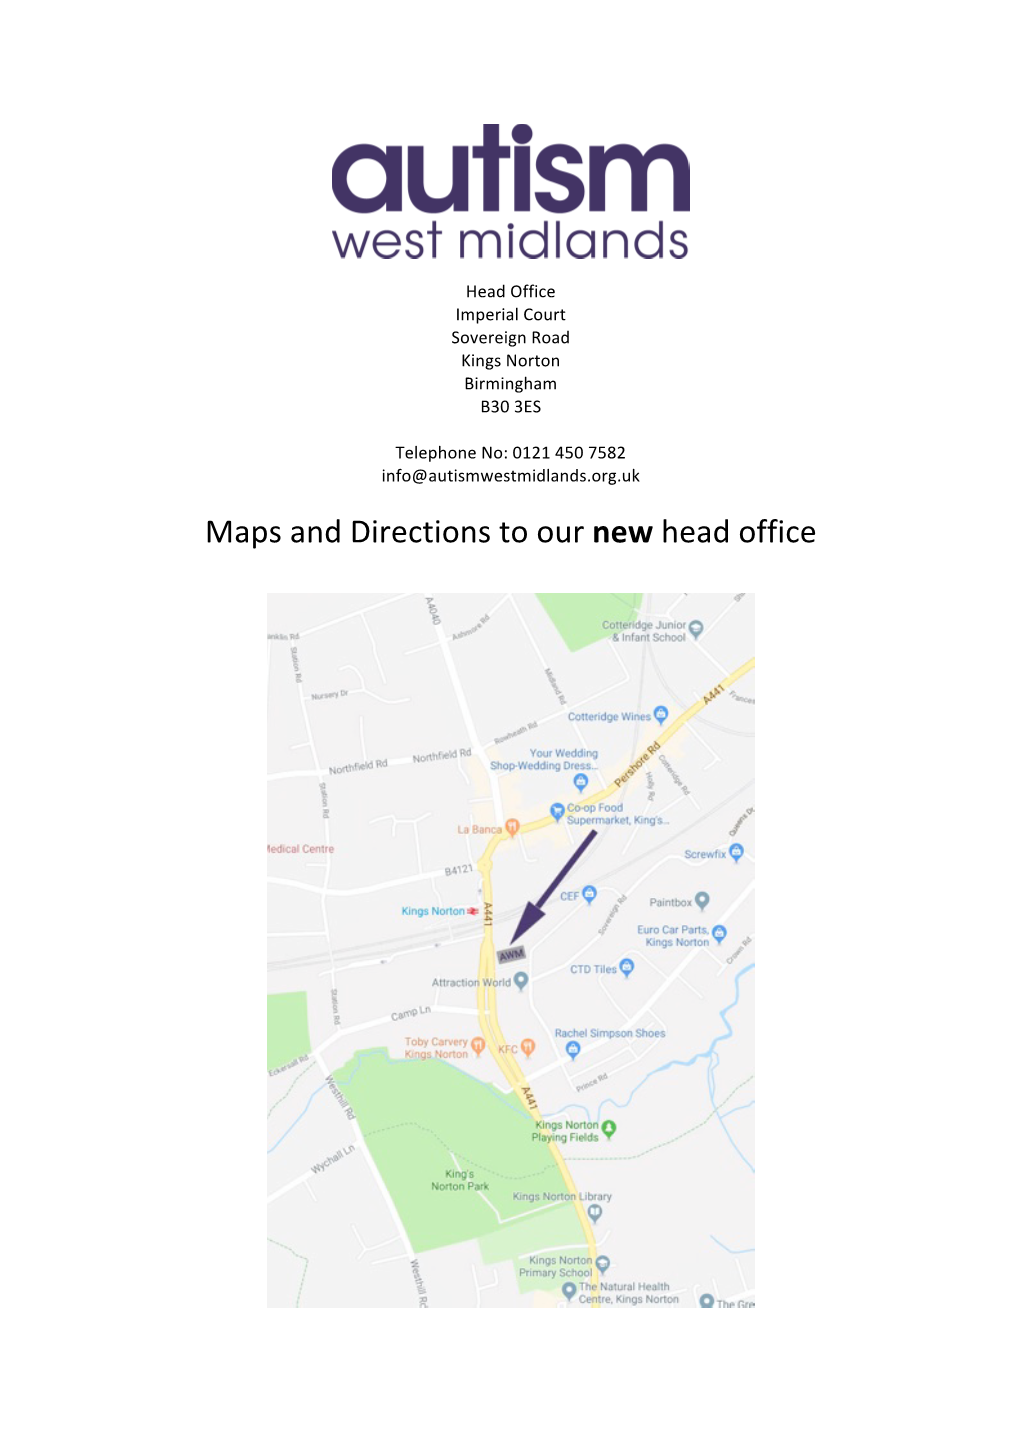 Maps and Directions to Our New Head Office